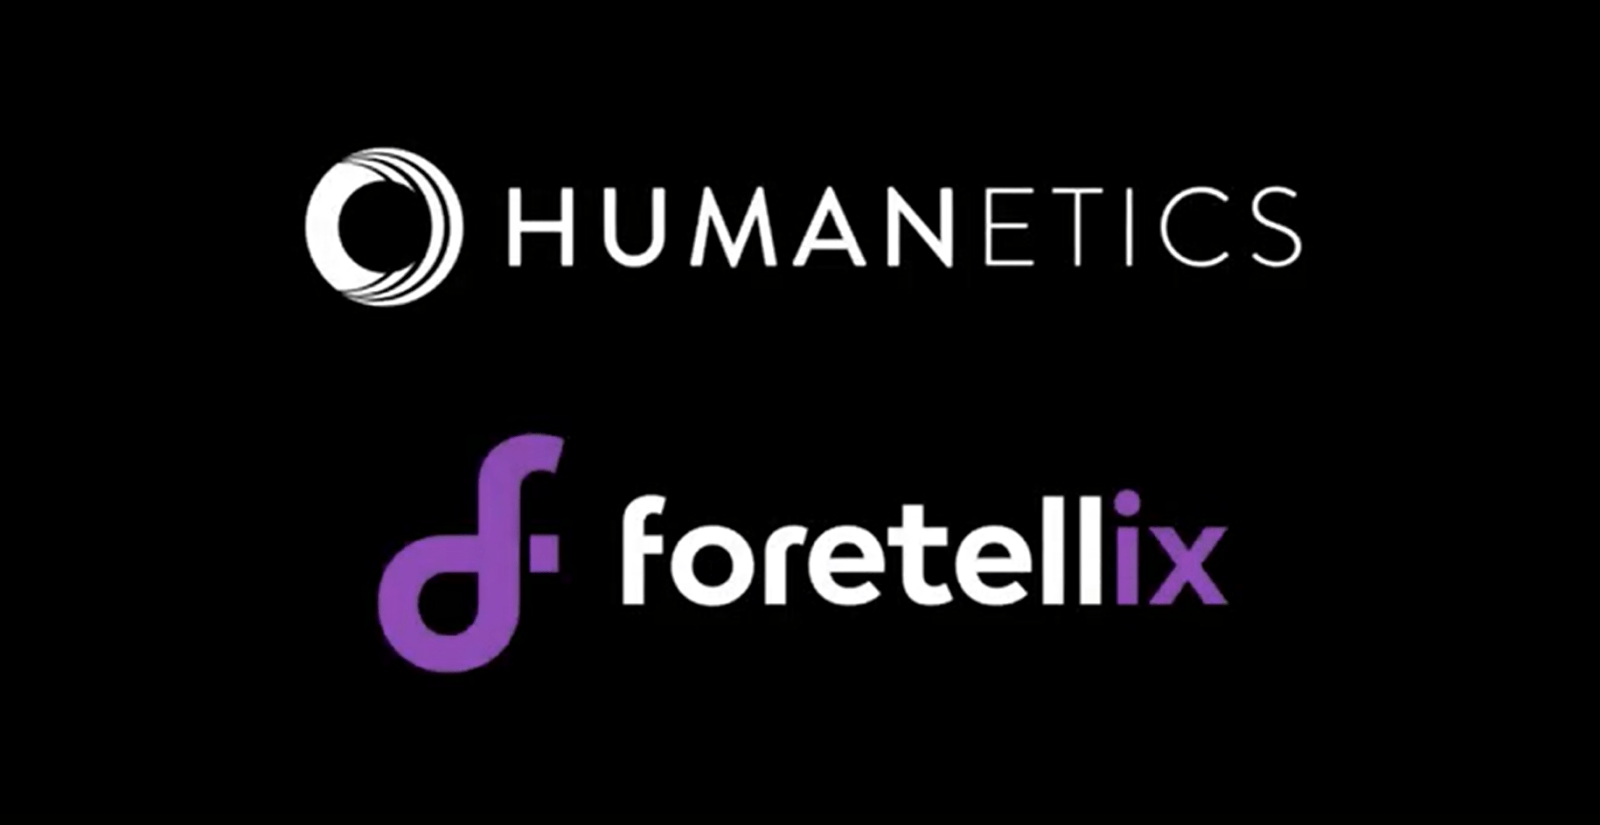 Humanetics & Foretellix: Connecting the Worlds of Active Safety Development